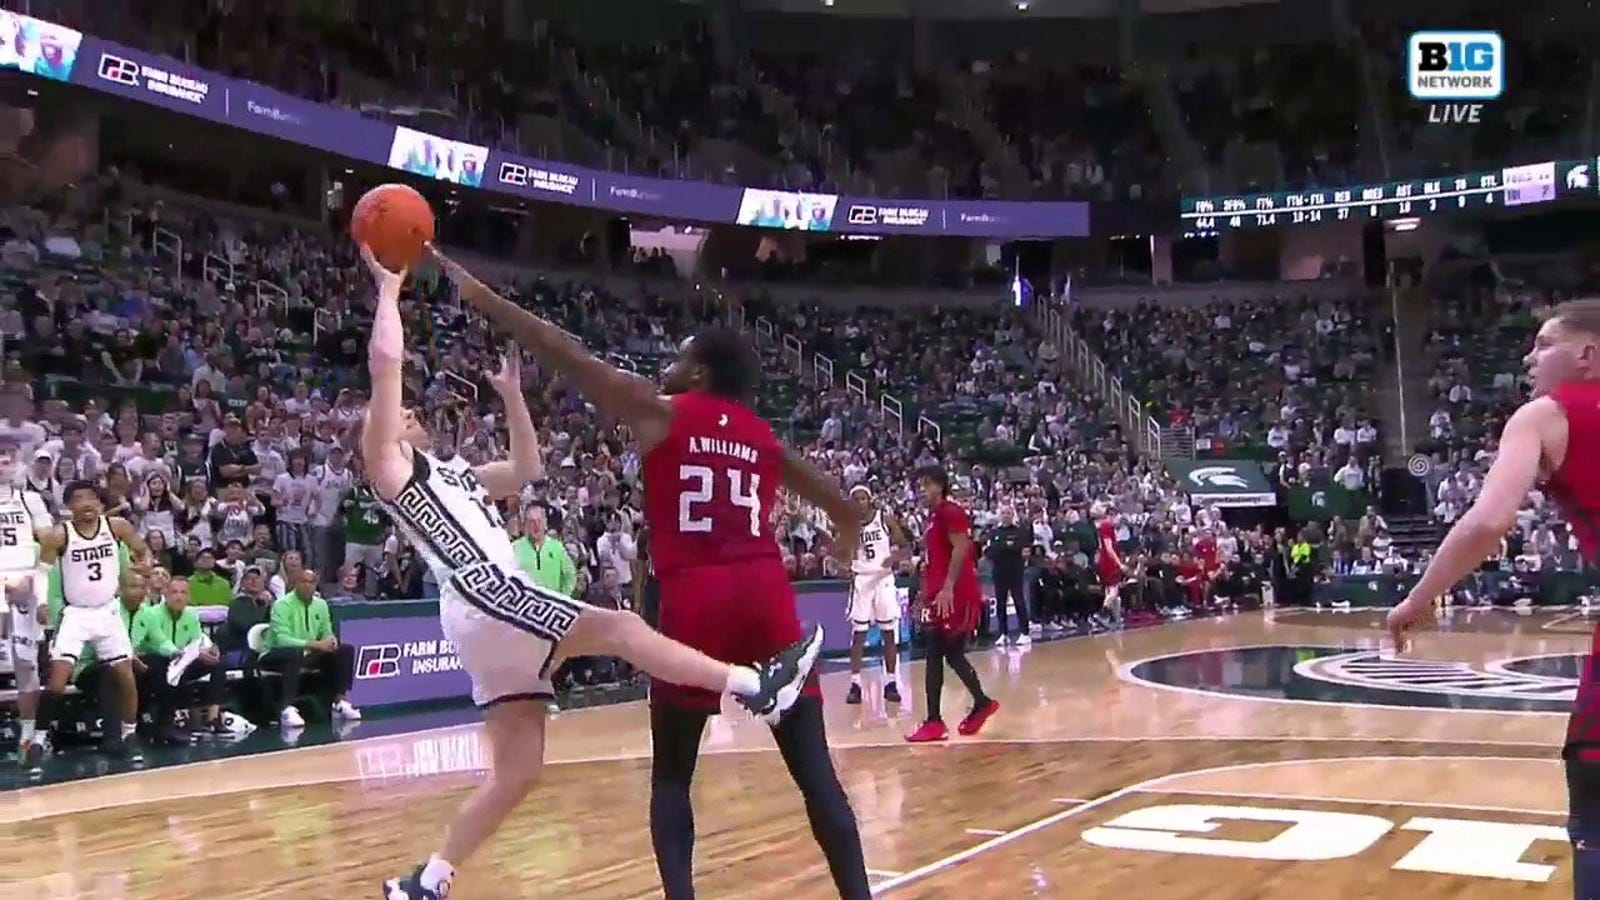 Steven Izzo scores his first field goal with an and-1 finish in Michigan State's 73-55 win over Rutgers